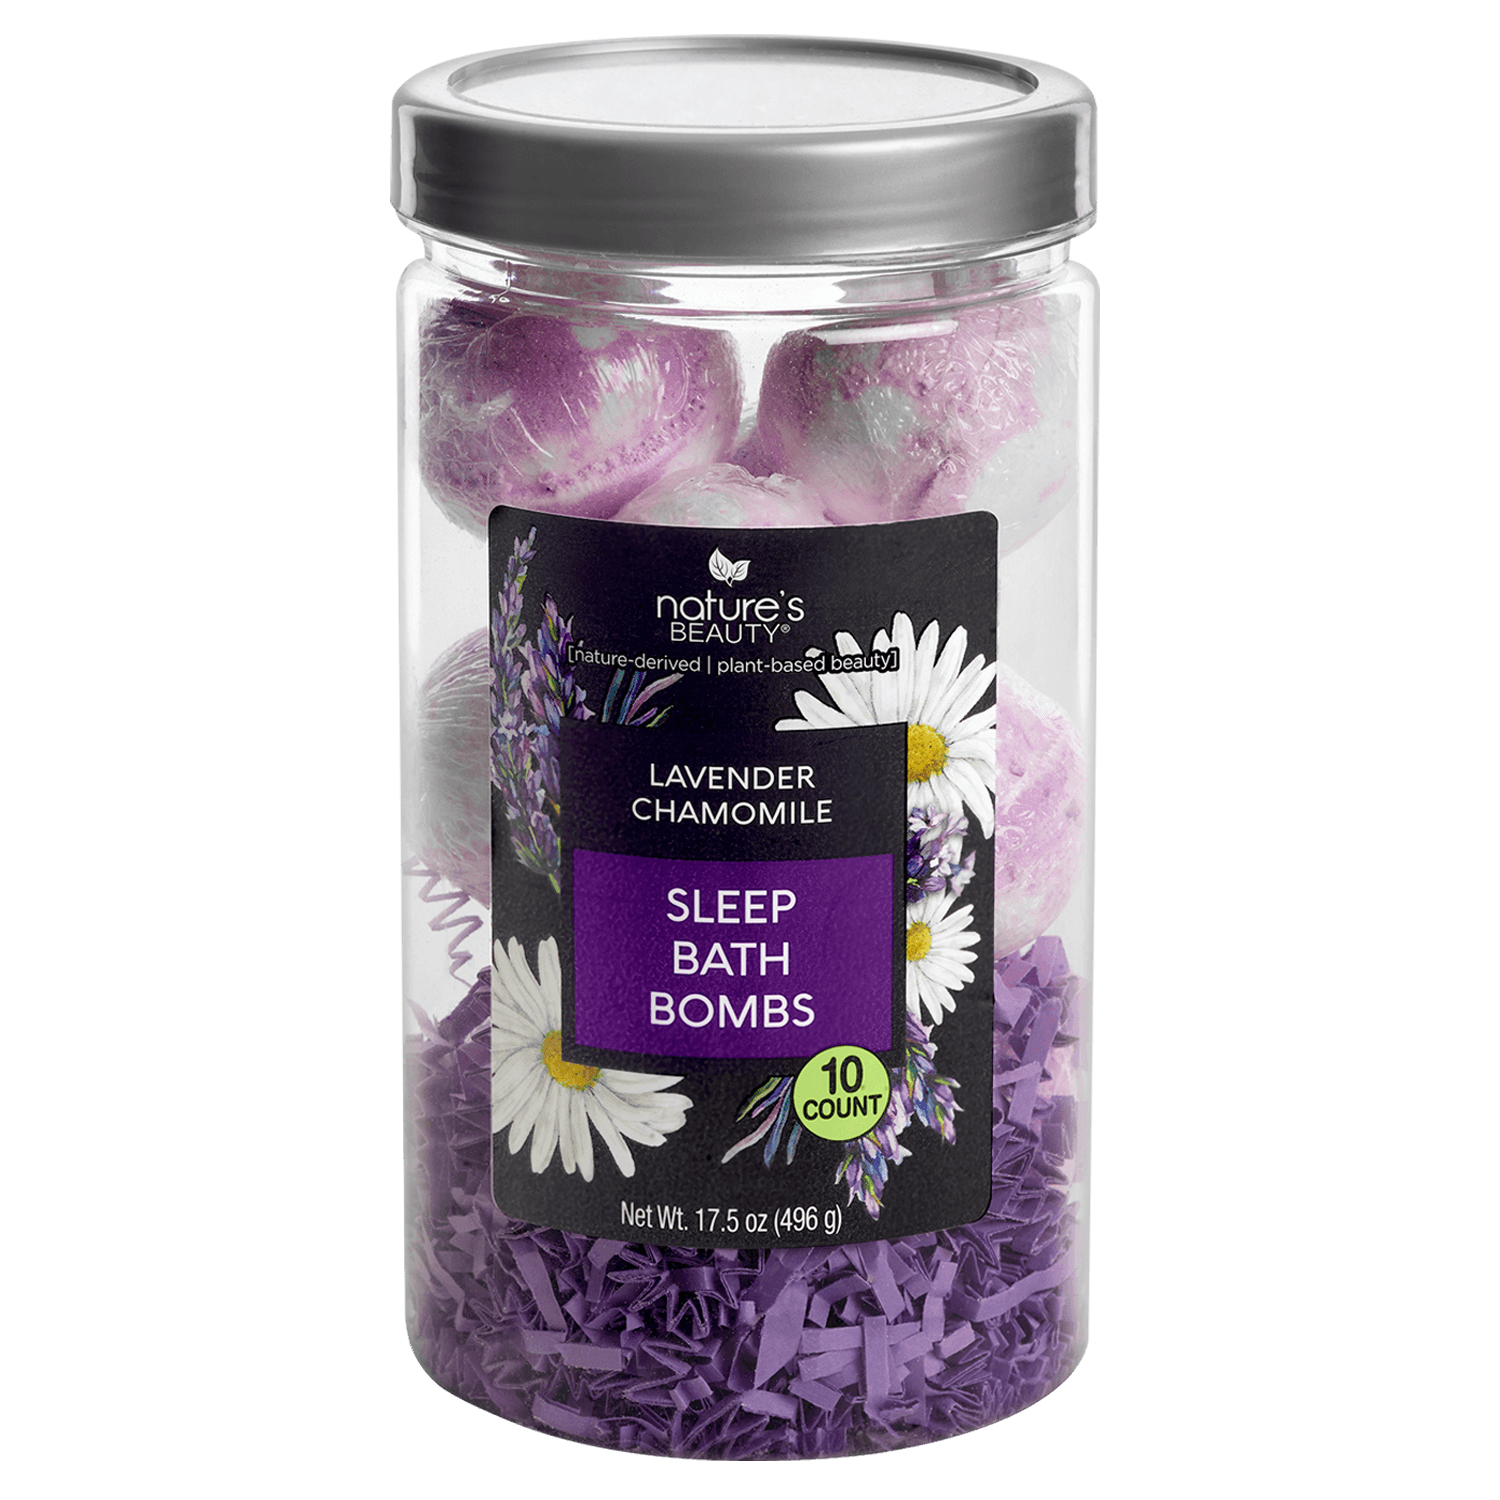 Lavender Chamomile Sleep Solution Set Nature's Beauty Body Care 